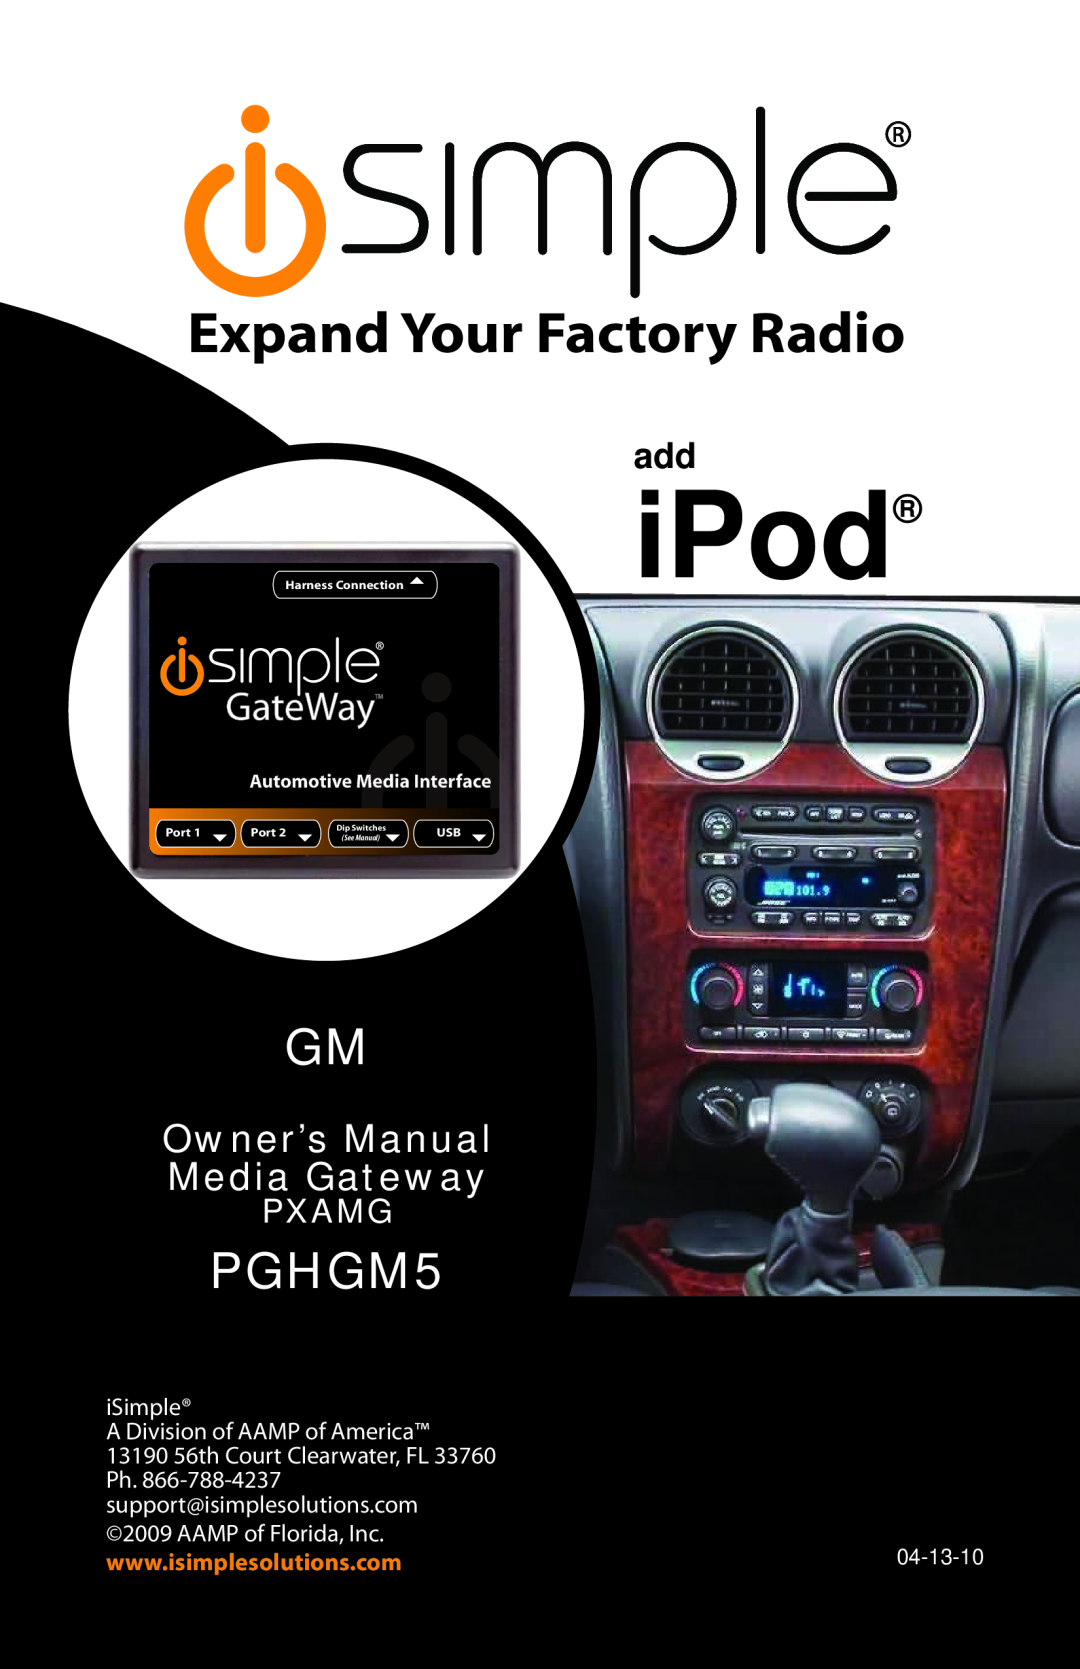 iSimple PGHGM5 owner manual Satellite Radio, Expand Your Factory Radio, ISGM11, iSimple A Division of AAMP of America 